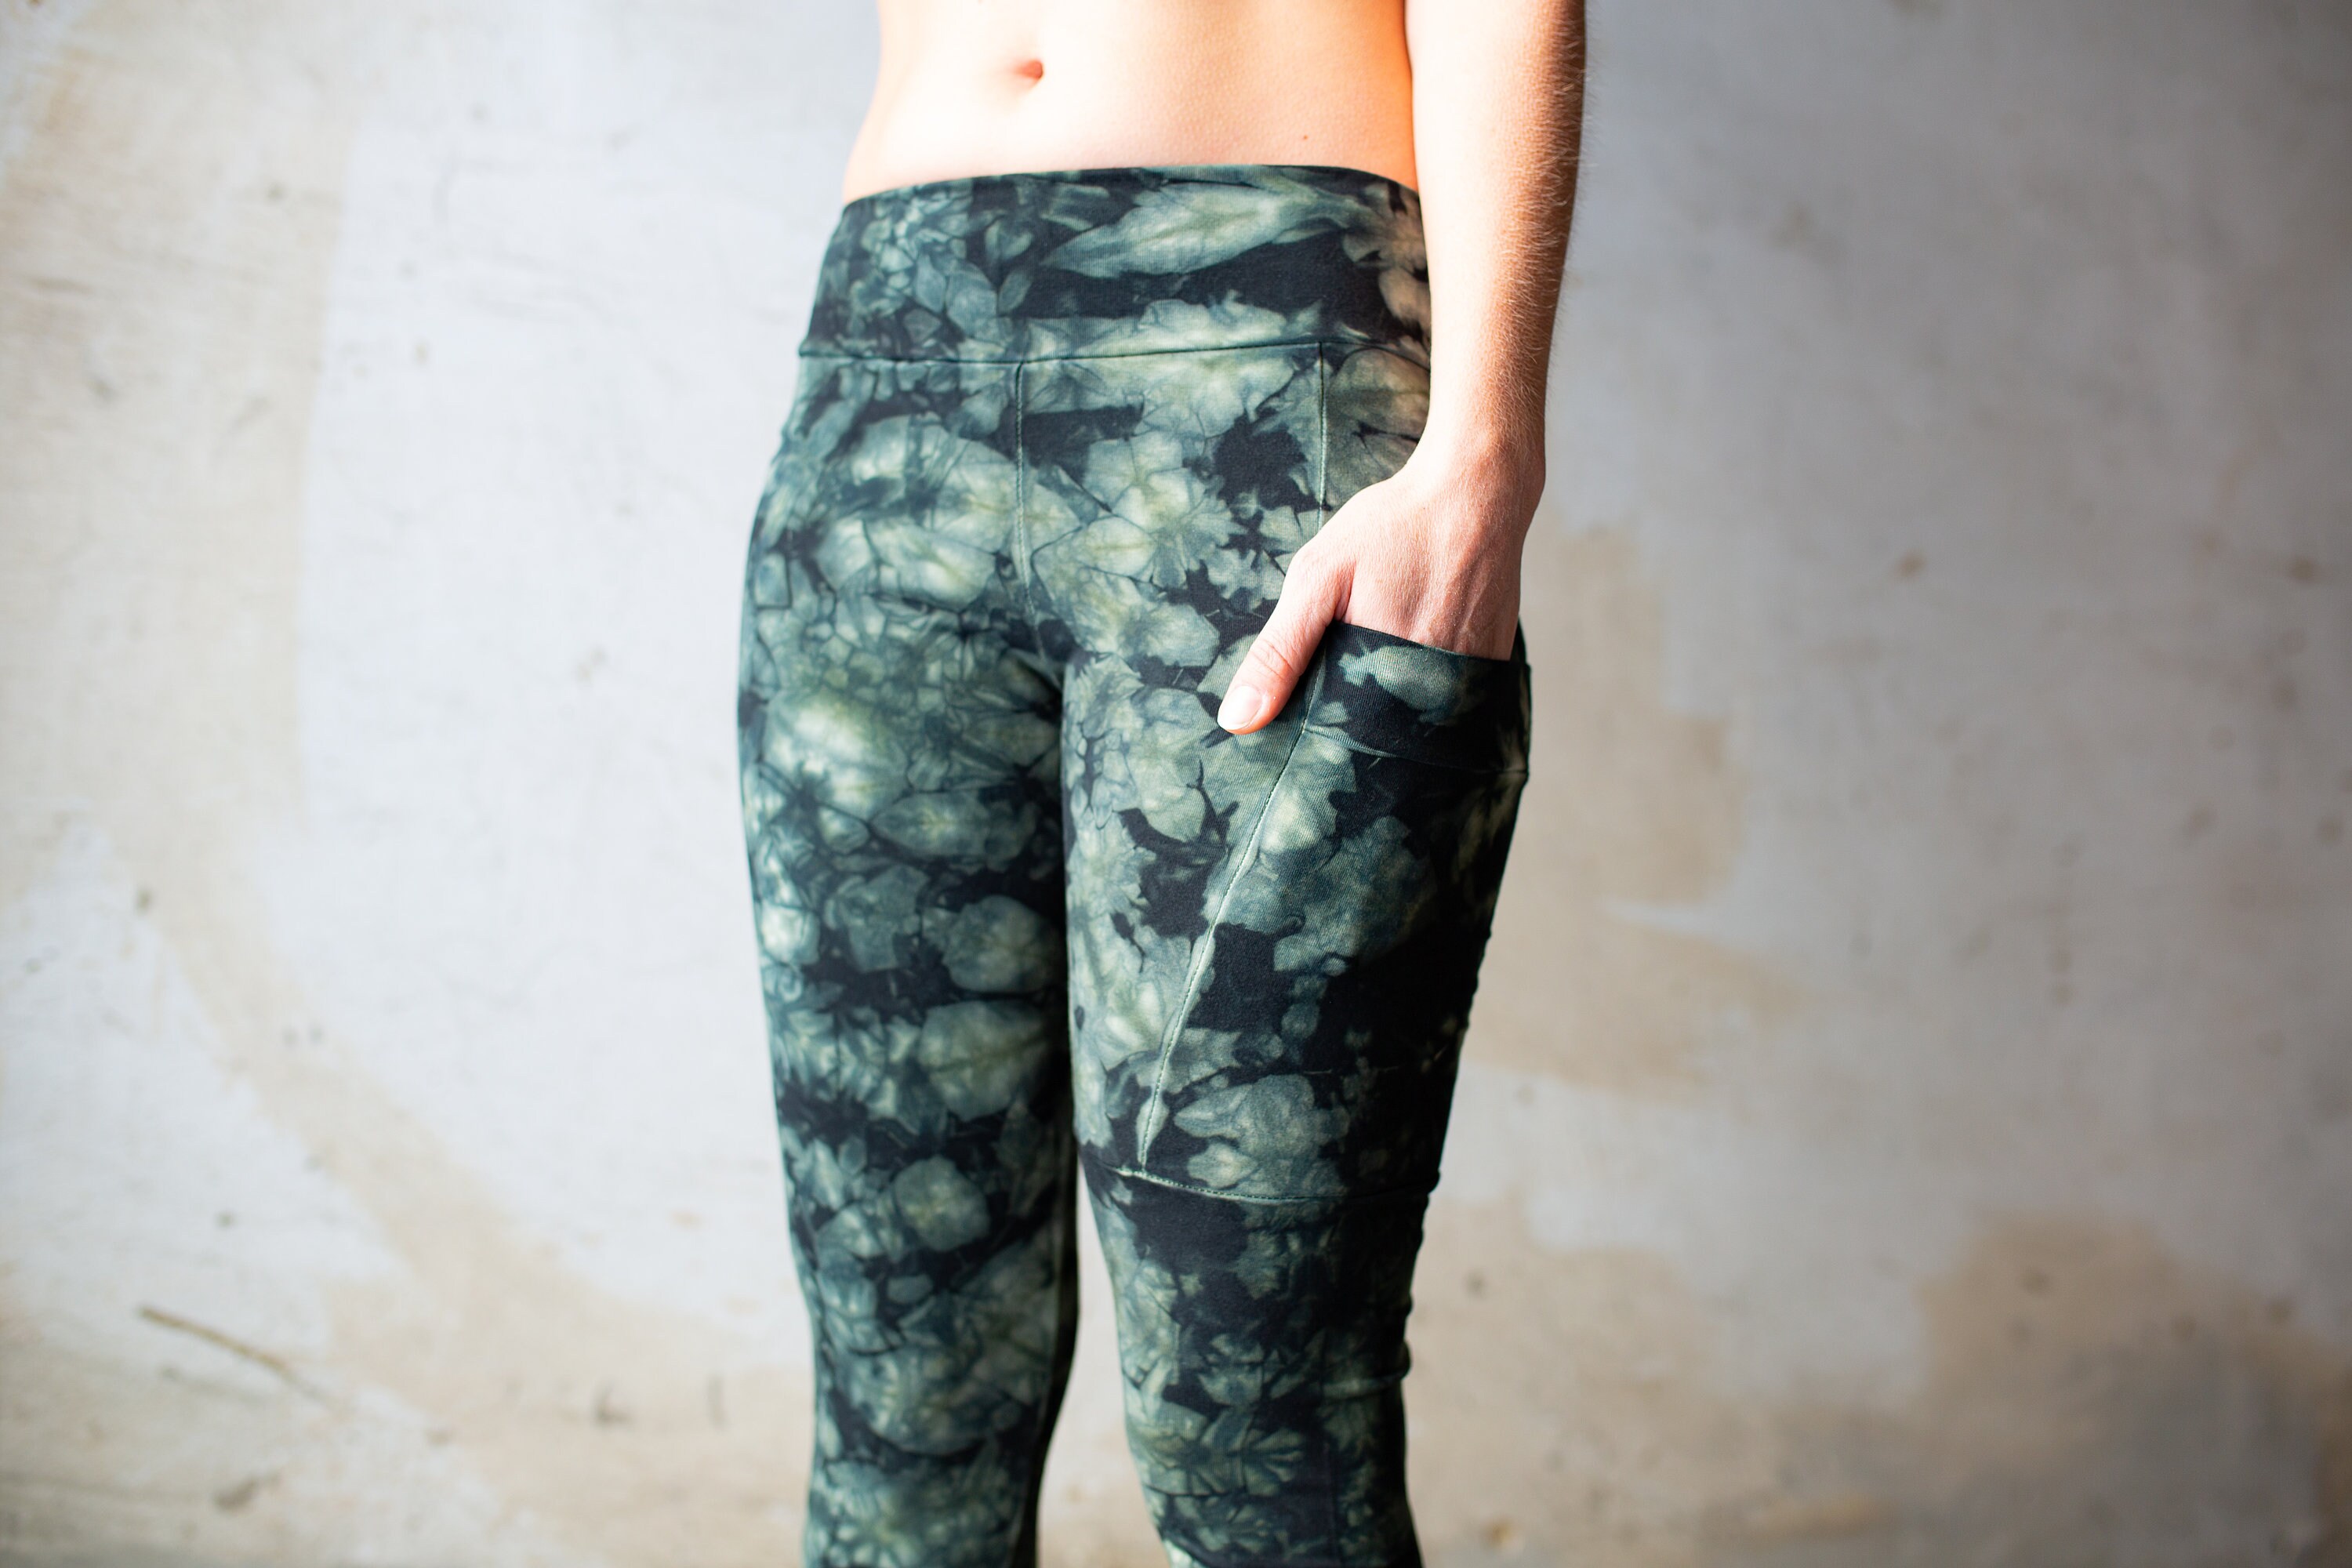 LEGGINGS with an abstract floral Pattern - Batik, Tie-Dye - unisex -  green-olive green